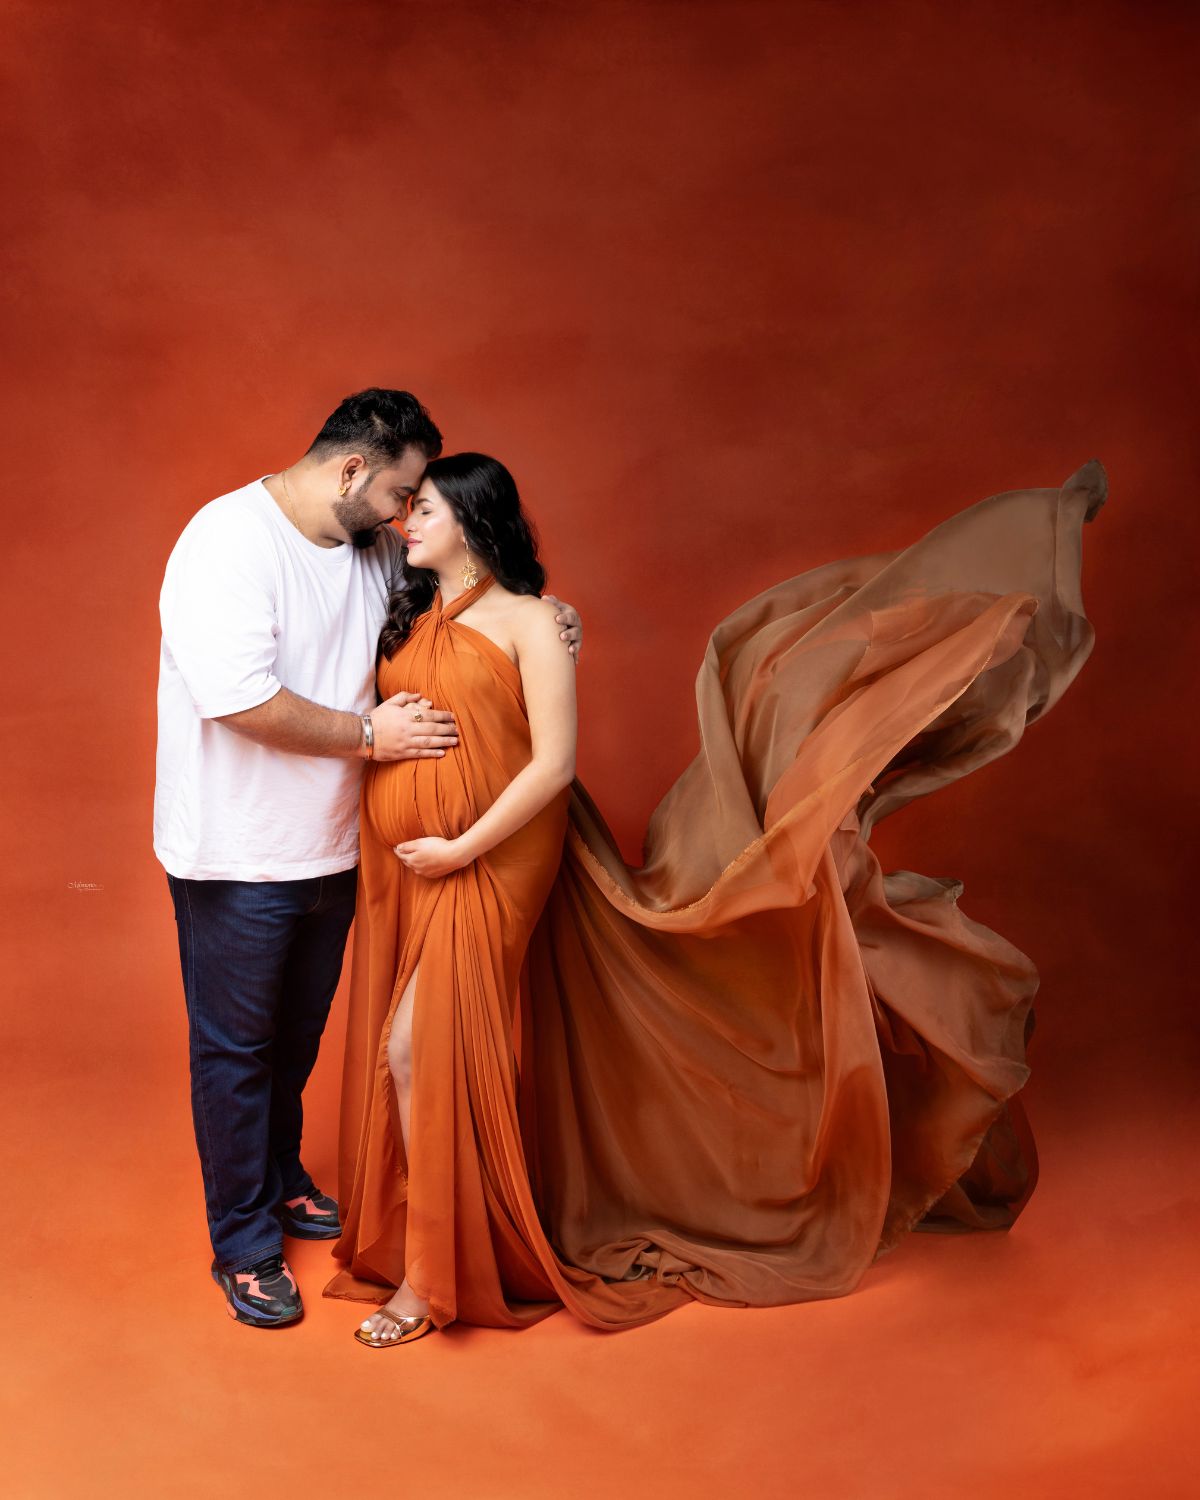 Introducing the Magic of Pregnancy Couple Poses